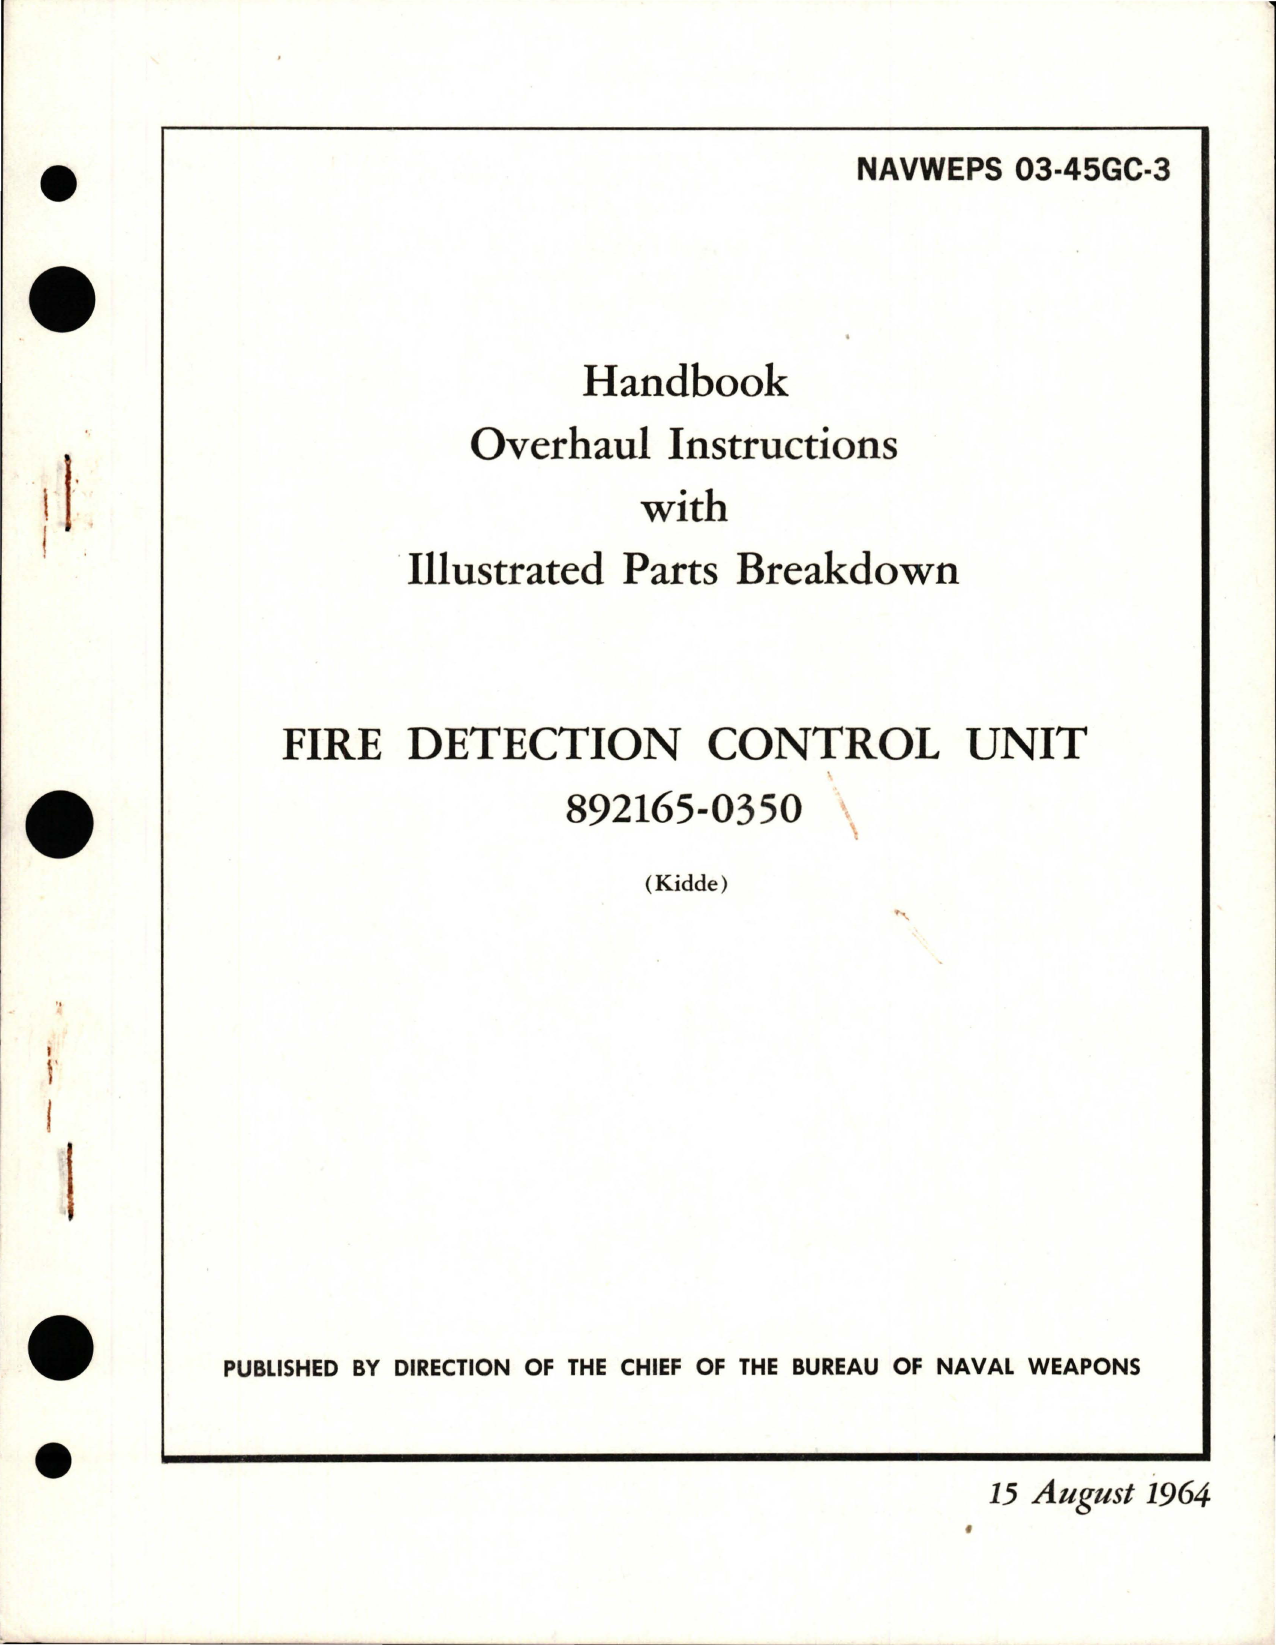 Sample page 1 from AirCorps Library document: Overhaul Instructions with Illustrated Parts Breakdown for Fire Detection Control Unit - 892165-0350 